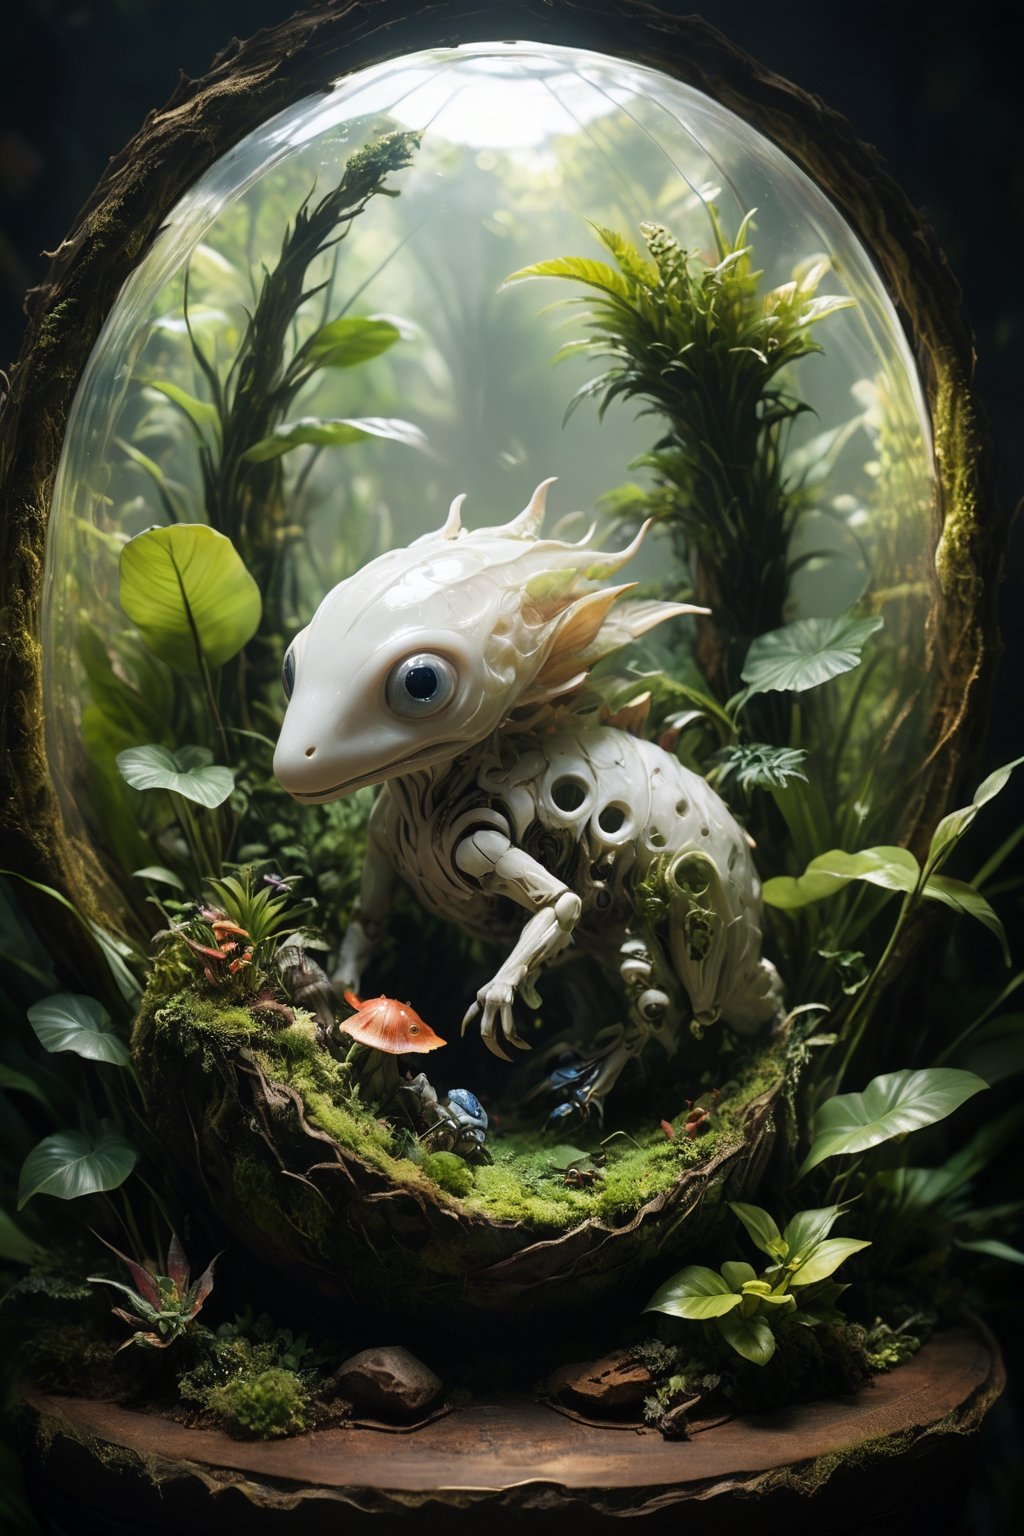 an intricate delicate porcelain sculpture placed inside a tropical lush terrarium with surreal alien like critters spanning the range between fantastical and realistic, robotic and organic, artistic composition, masterpiece quality, highly detailed, bathed in warm natural light of an early morning sun, (chiaroscuro), side light casting long shadows